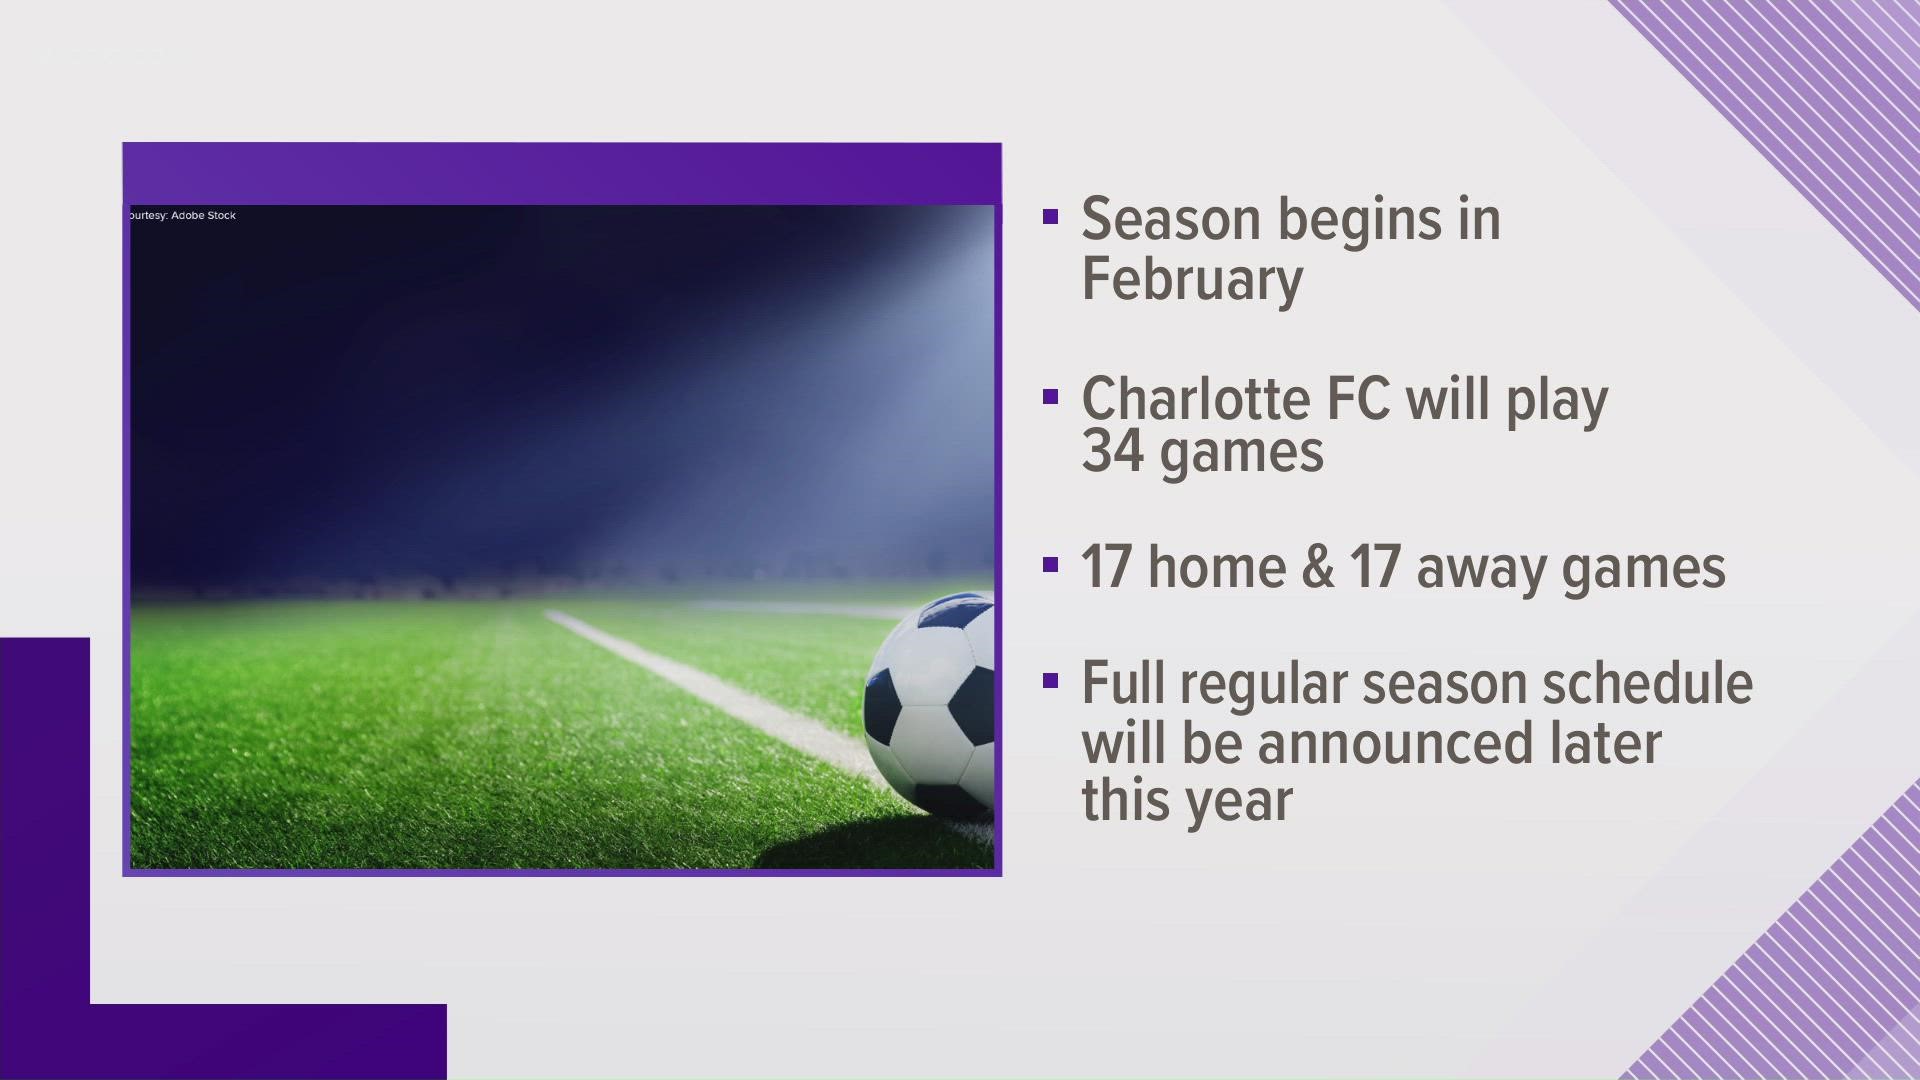 The full season schedule will be announced later this year.